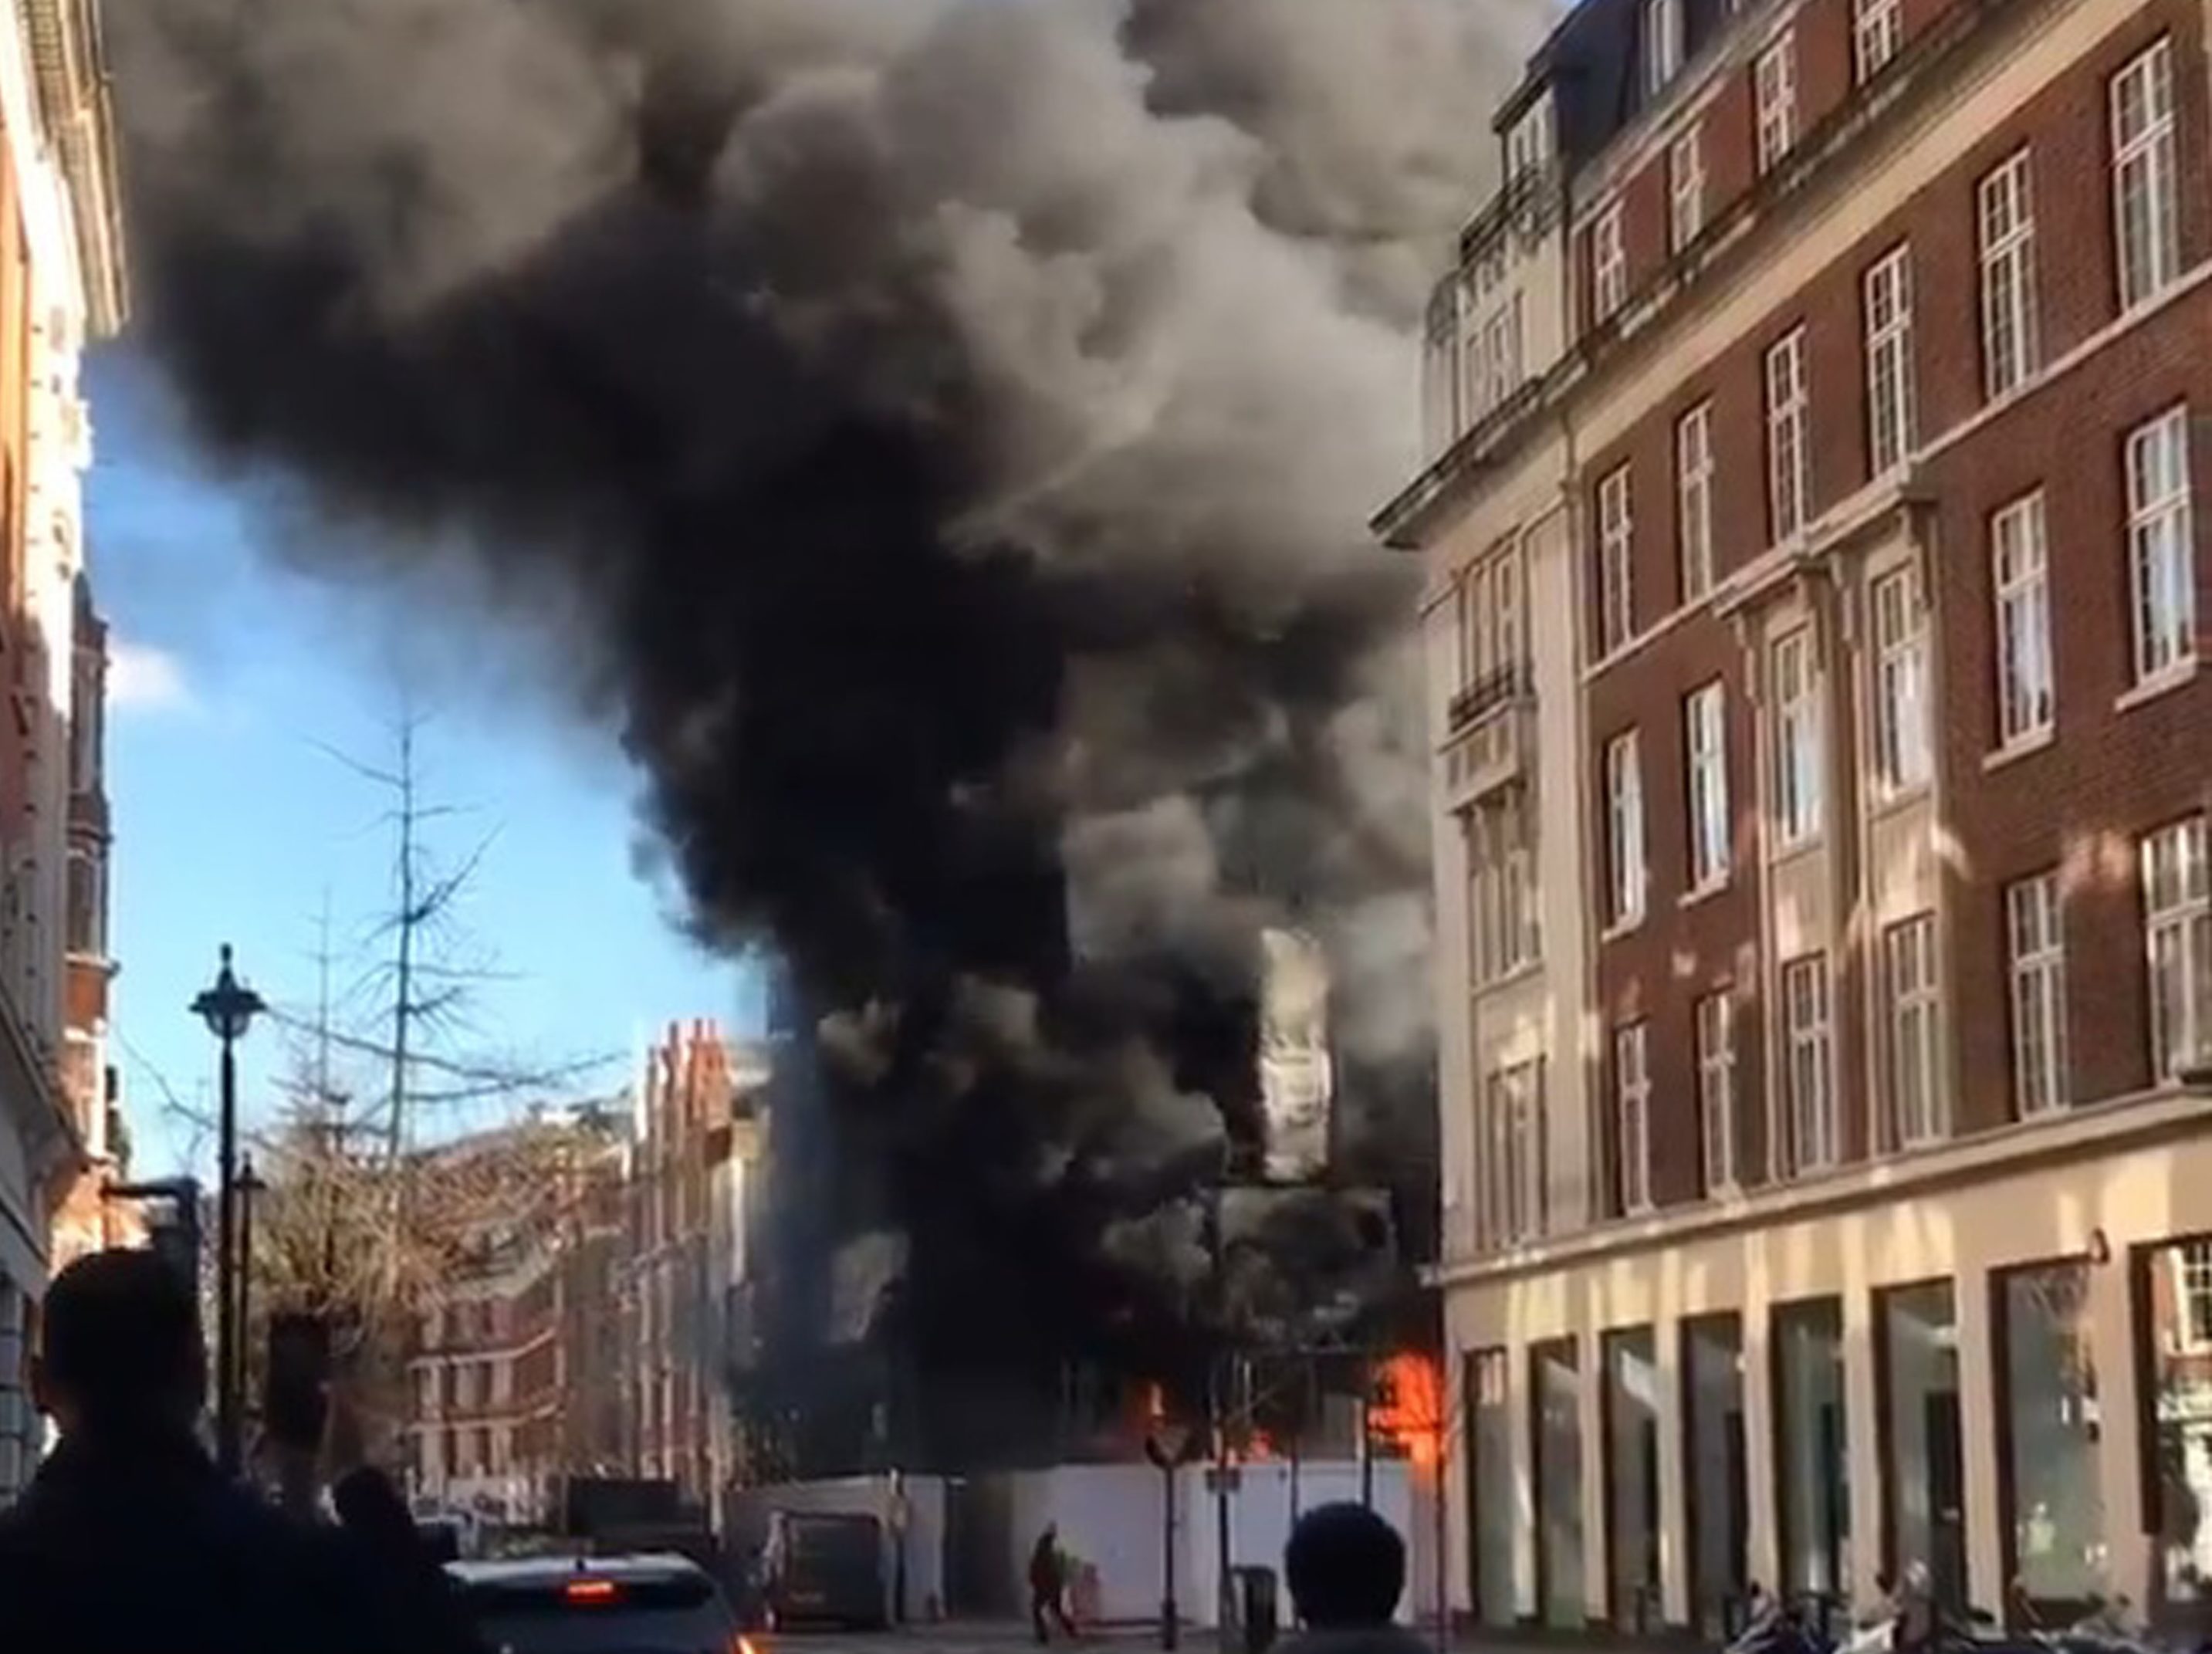 The fire on Great Portland Street, London (@MikeHolt12/PA)